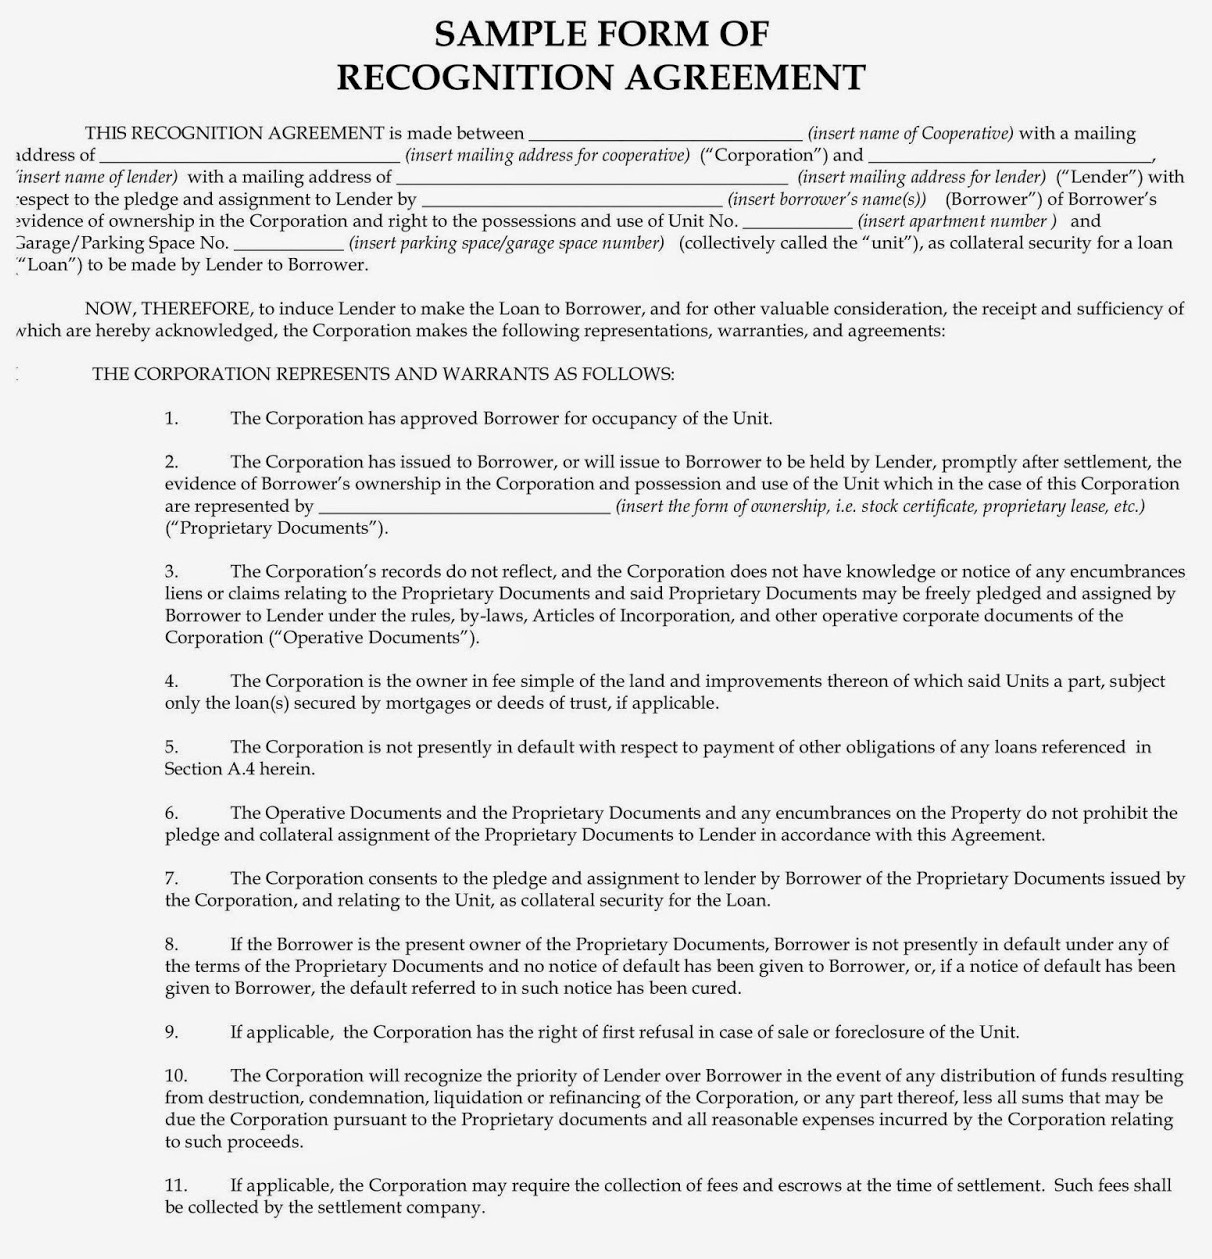 Aztech Recognition Agreements for Co-ops Explained